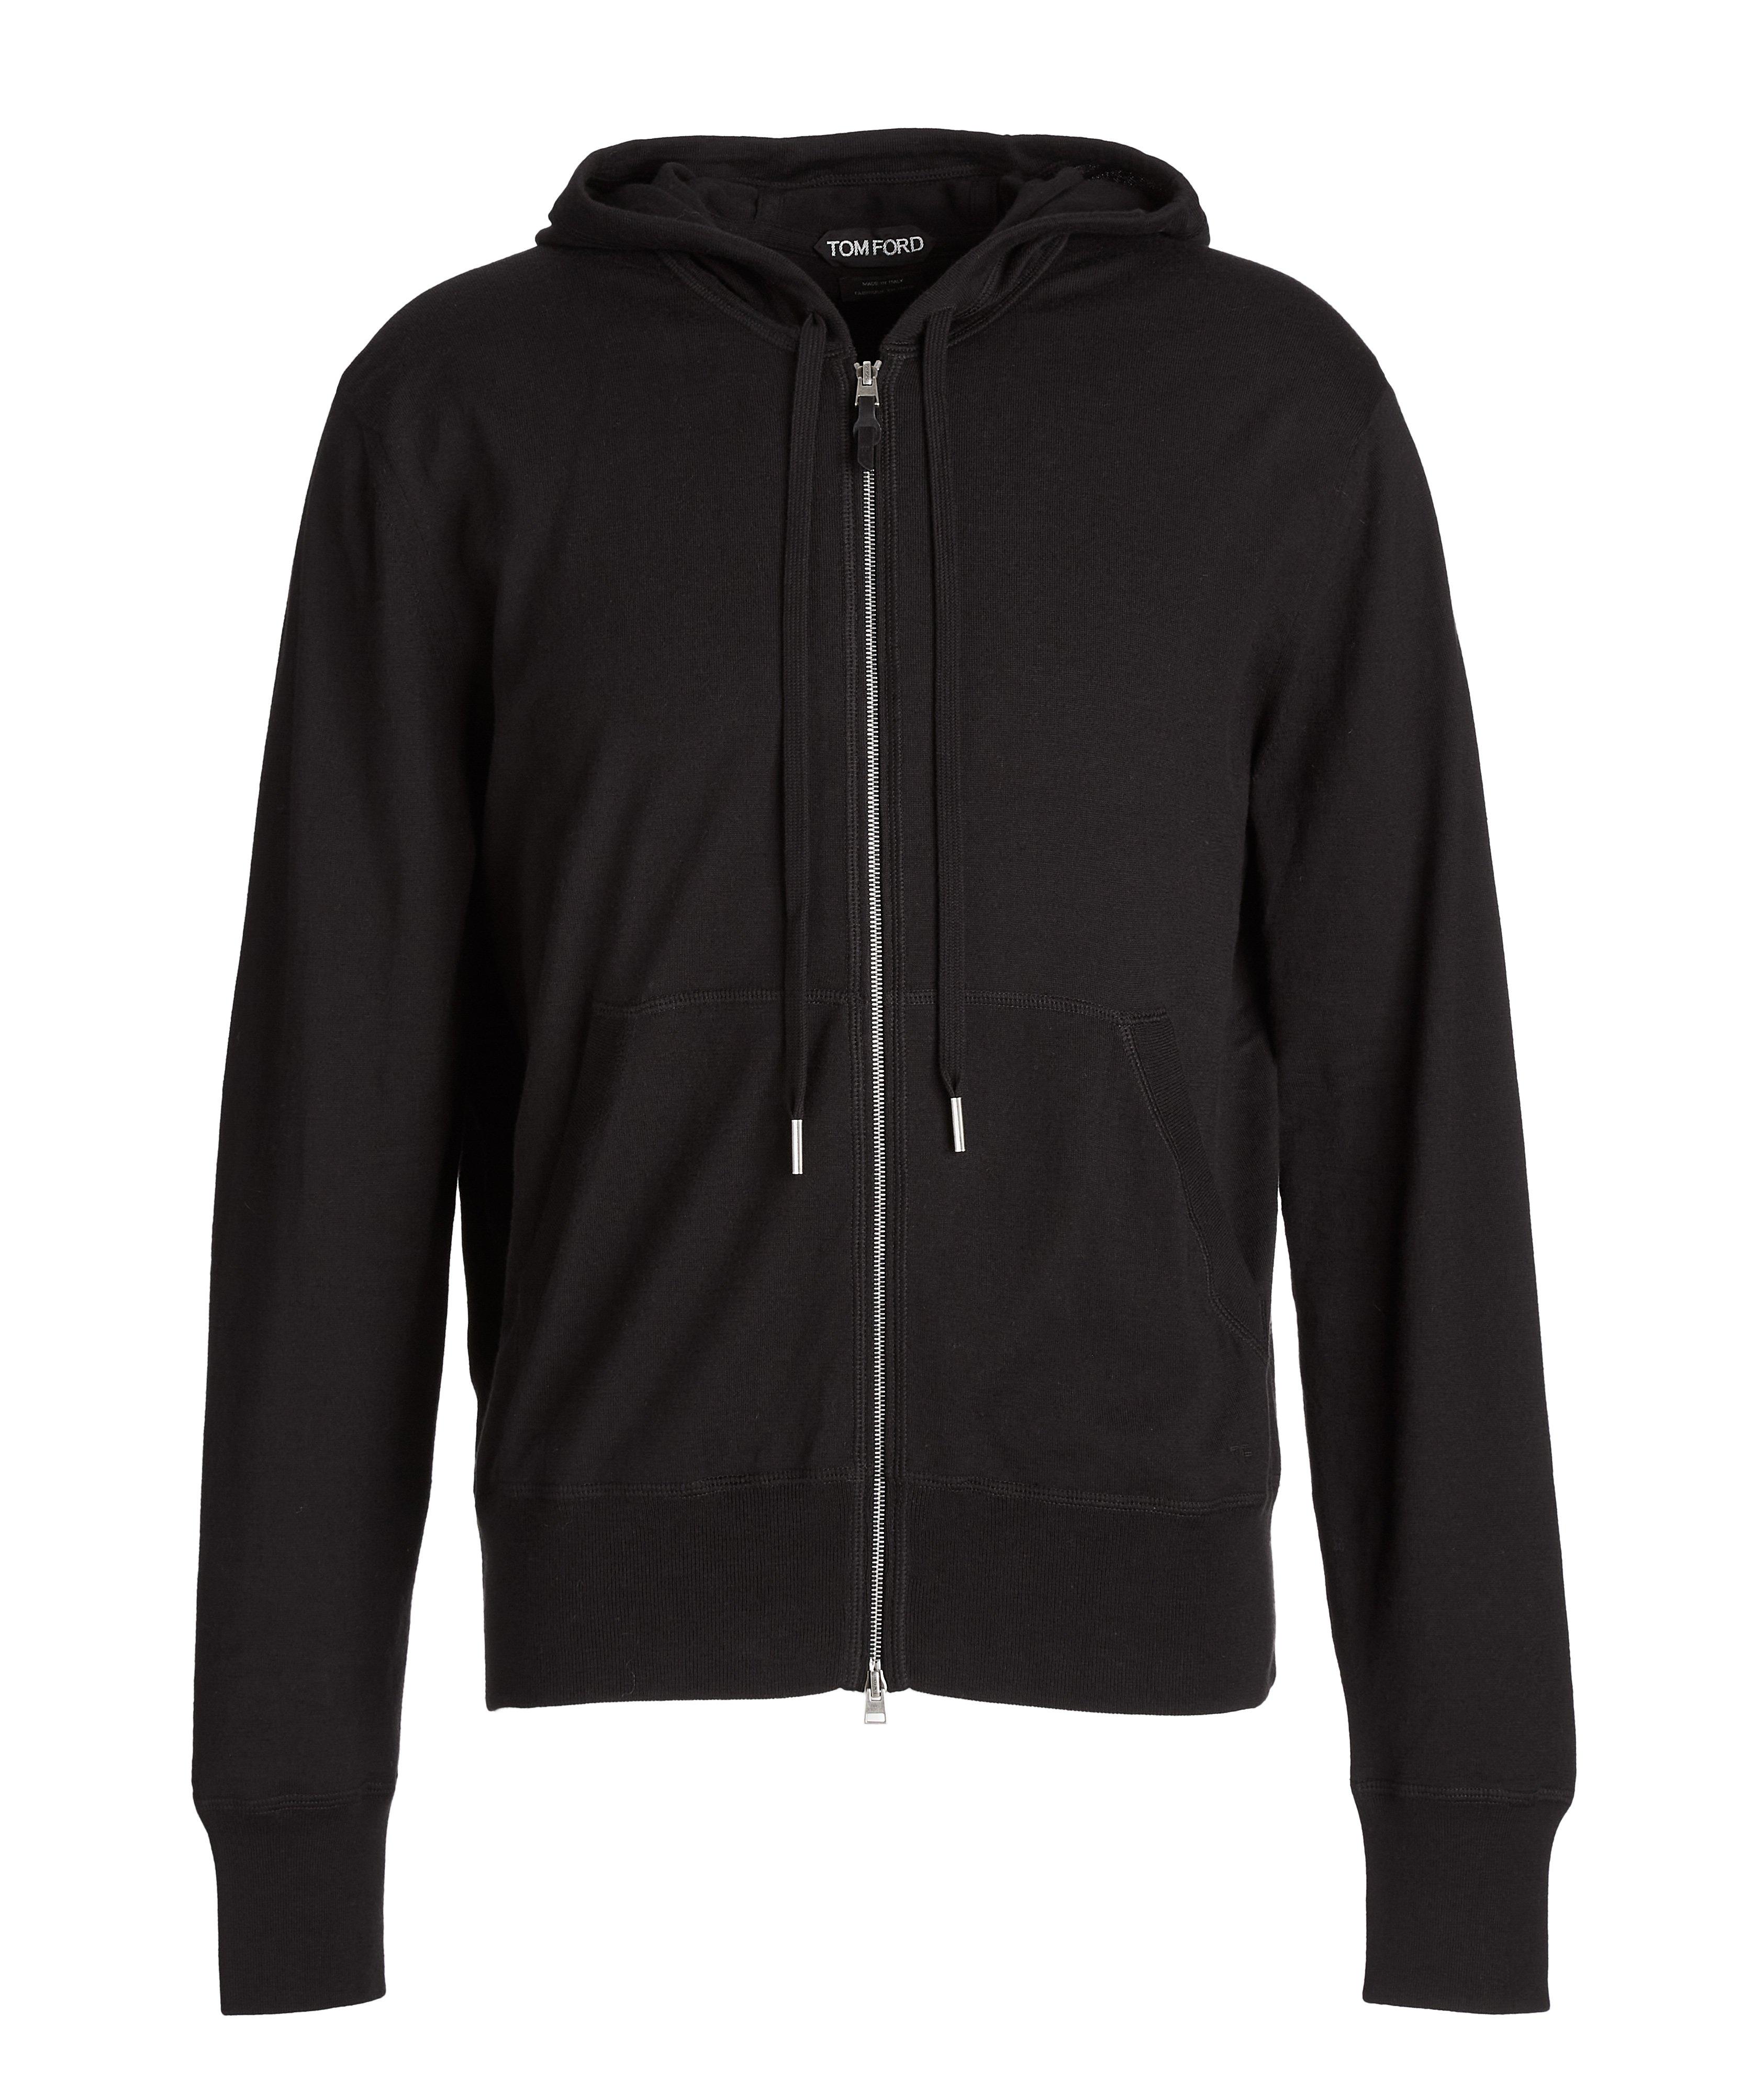 Cotton, Silk, And Cashmere Zip-Up Hoodie image 0